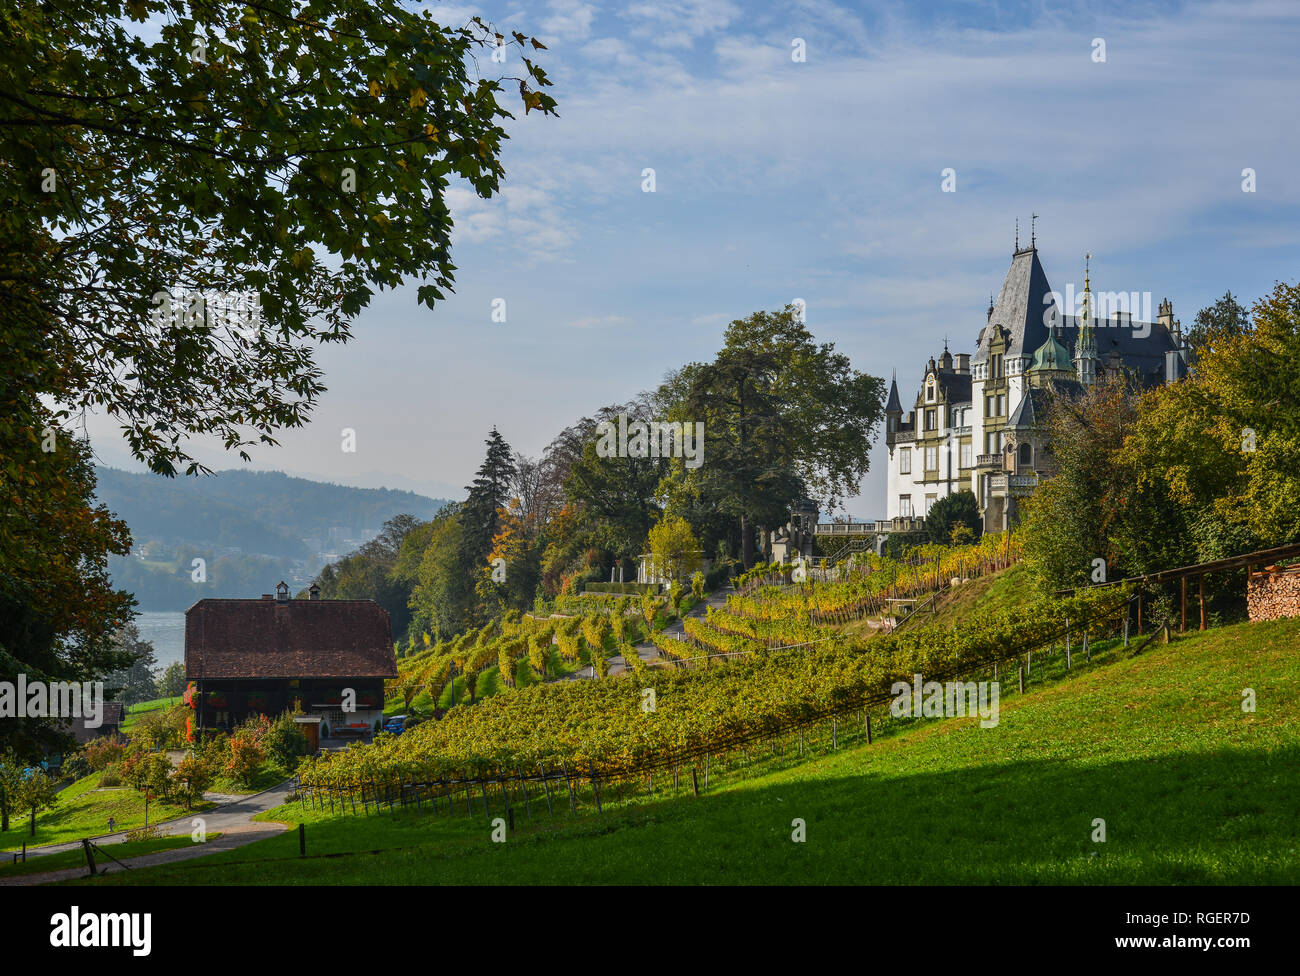 Meggenhorn Castle with vineyard in Lucerne, Switzerland. The castle is a Swiss heritage site of national significance. Stock Photo